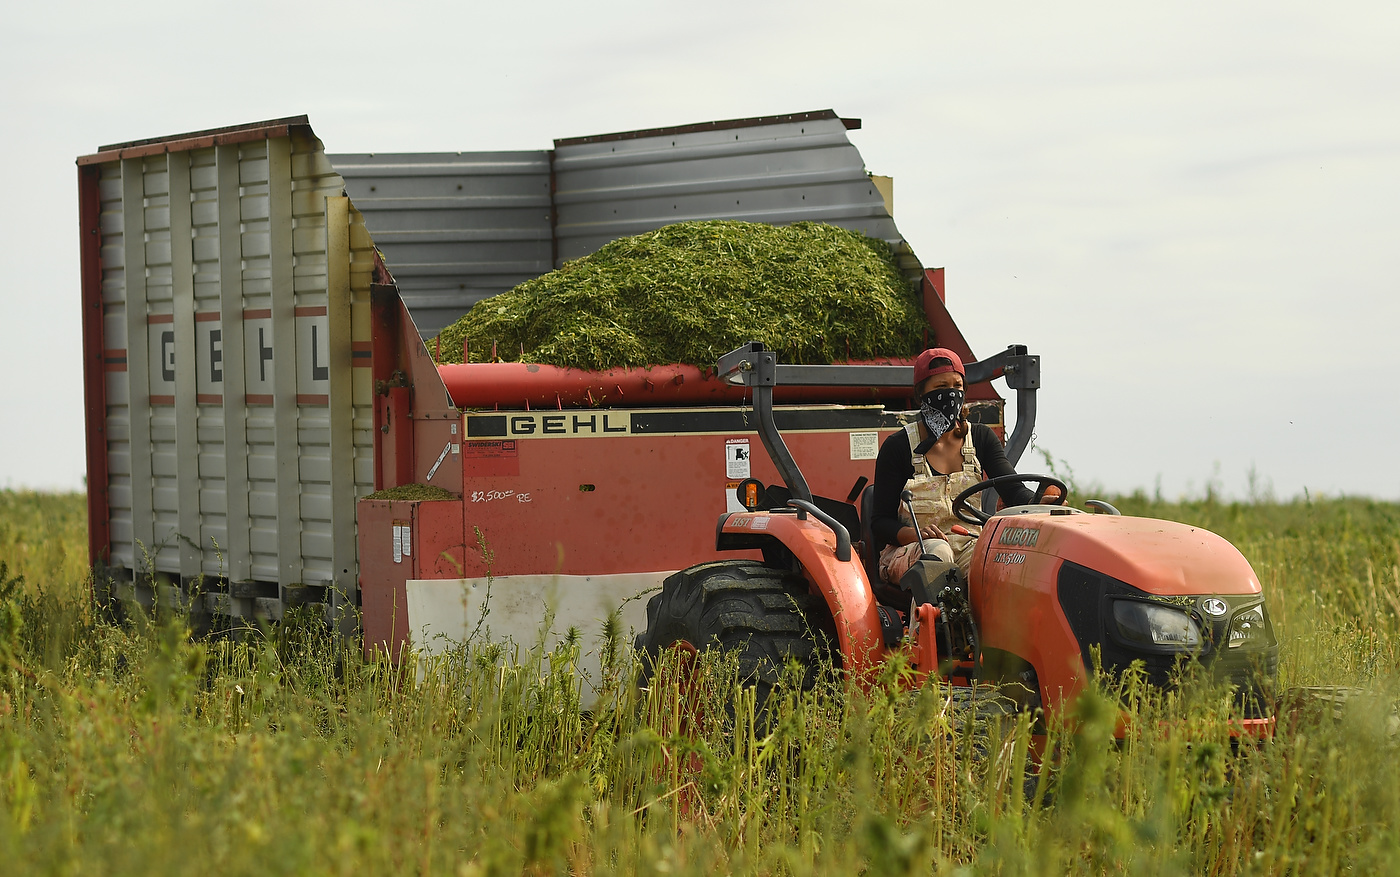 EATON, CO - SEPTEMBER 5: Shami Coleman, co-owner of Colorado Cultivars Hemp Farm brings in a load of hemp that was harvested on September 5, 2017 in Eaton, Colorado. (Photo by RJ Sangosti/The Denver Post)